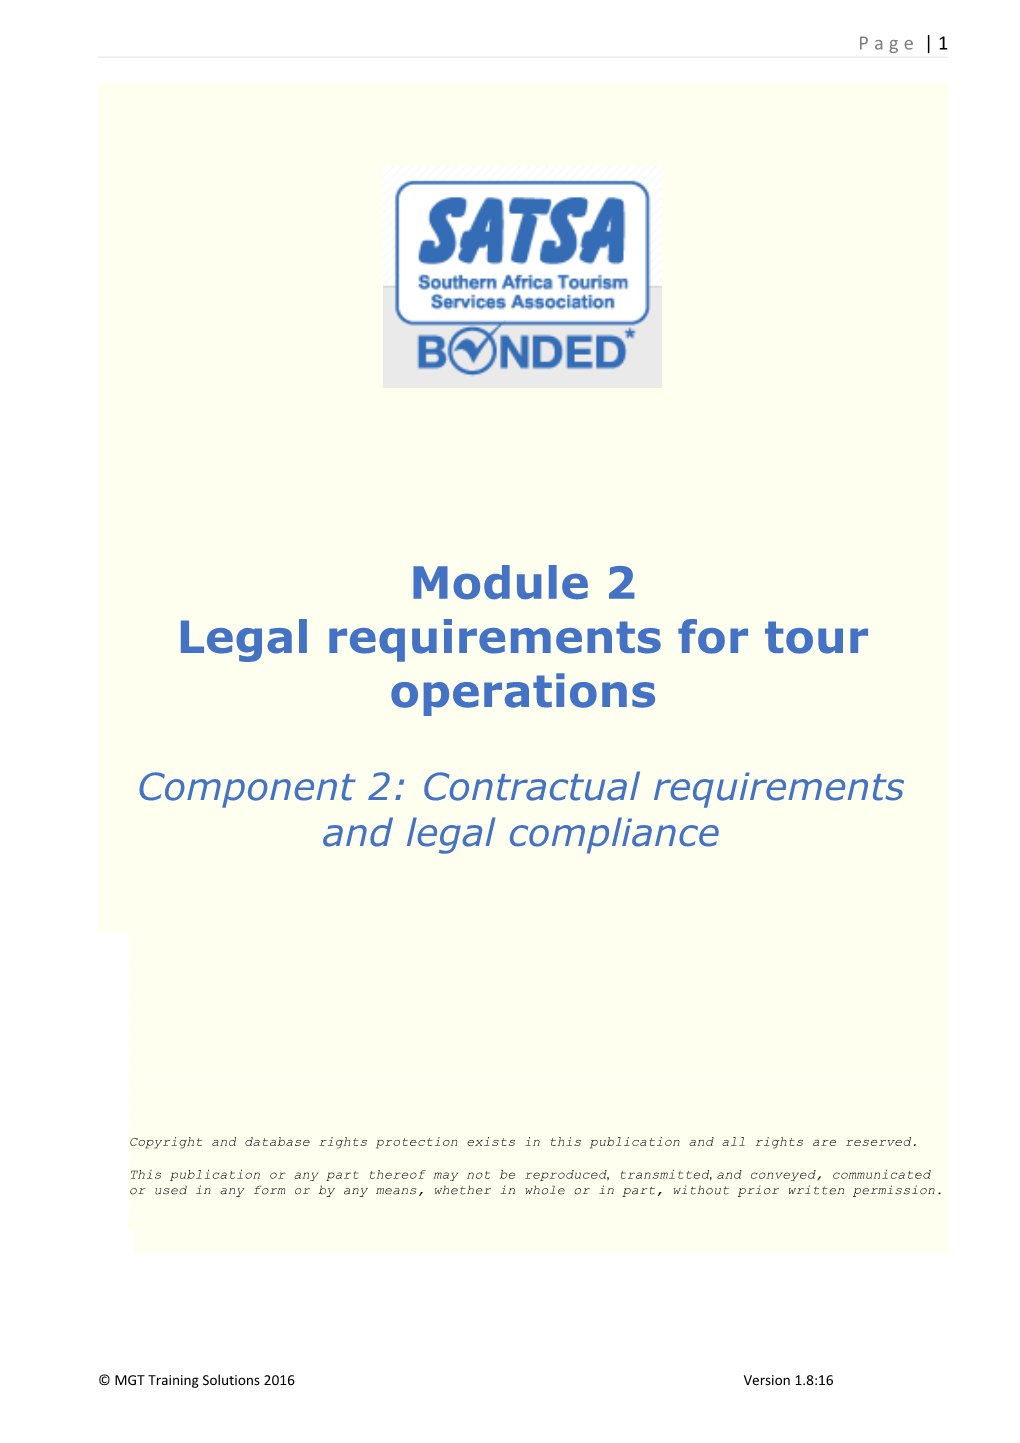 Legal Requirements for Tour Operations